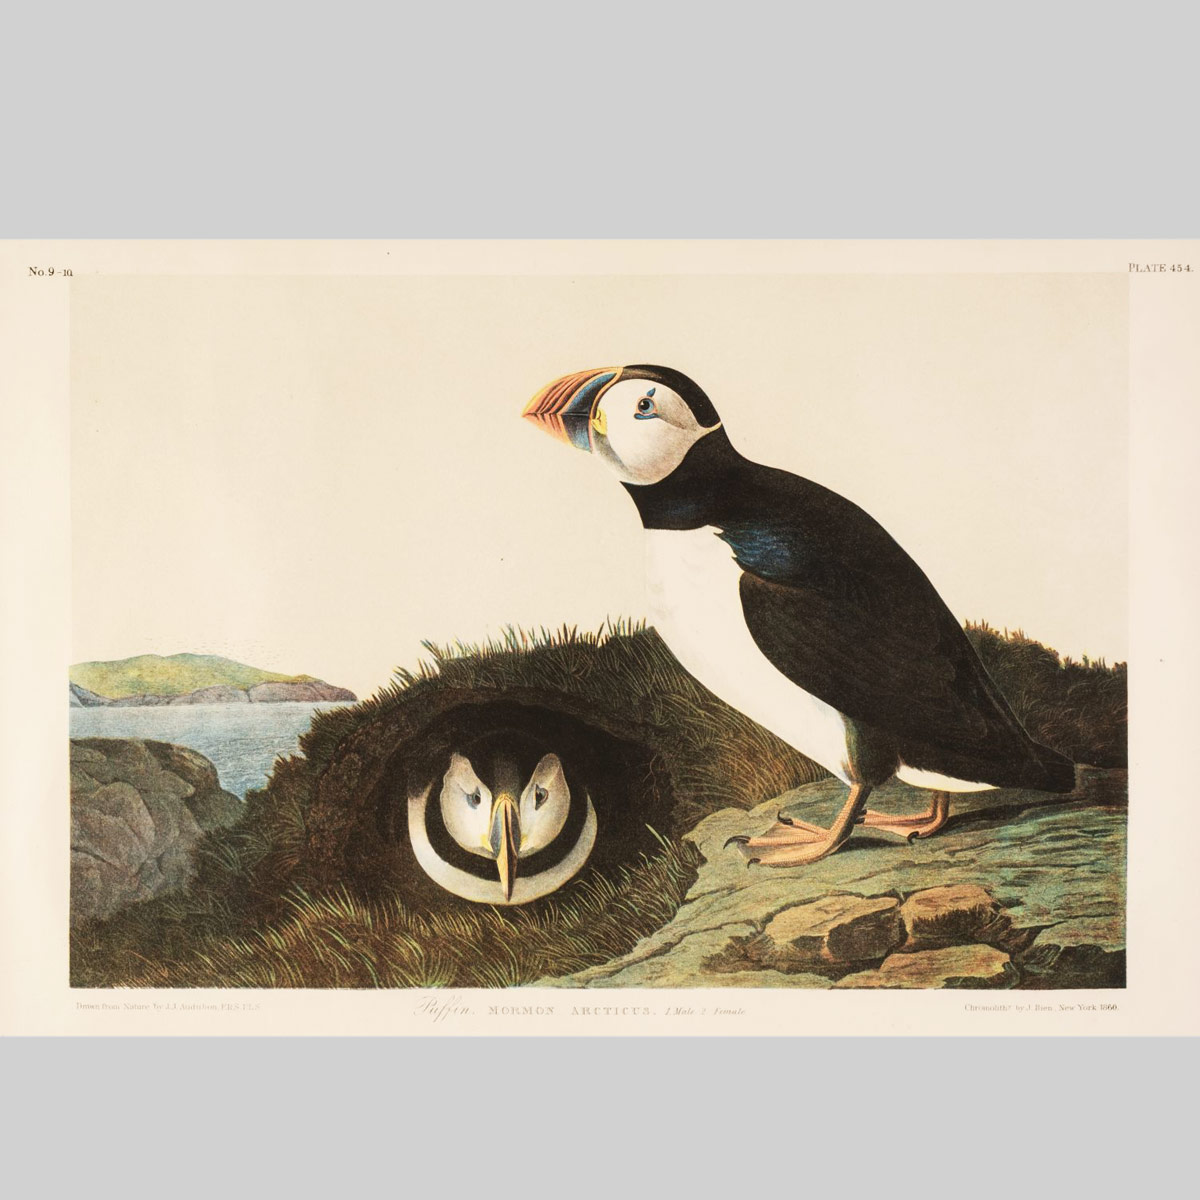 A very beautiful Original Chromolithograph of a Puffin by John James Audubon.

Link in Bio.

#antiqueprint #antiqueprints #antique #print #bathlife #bathlifemagazine #visitbath #chromolithograph #chromolithography #johnjamesaudubon #audubon #audubonprint #audubonsociety #puffin